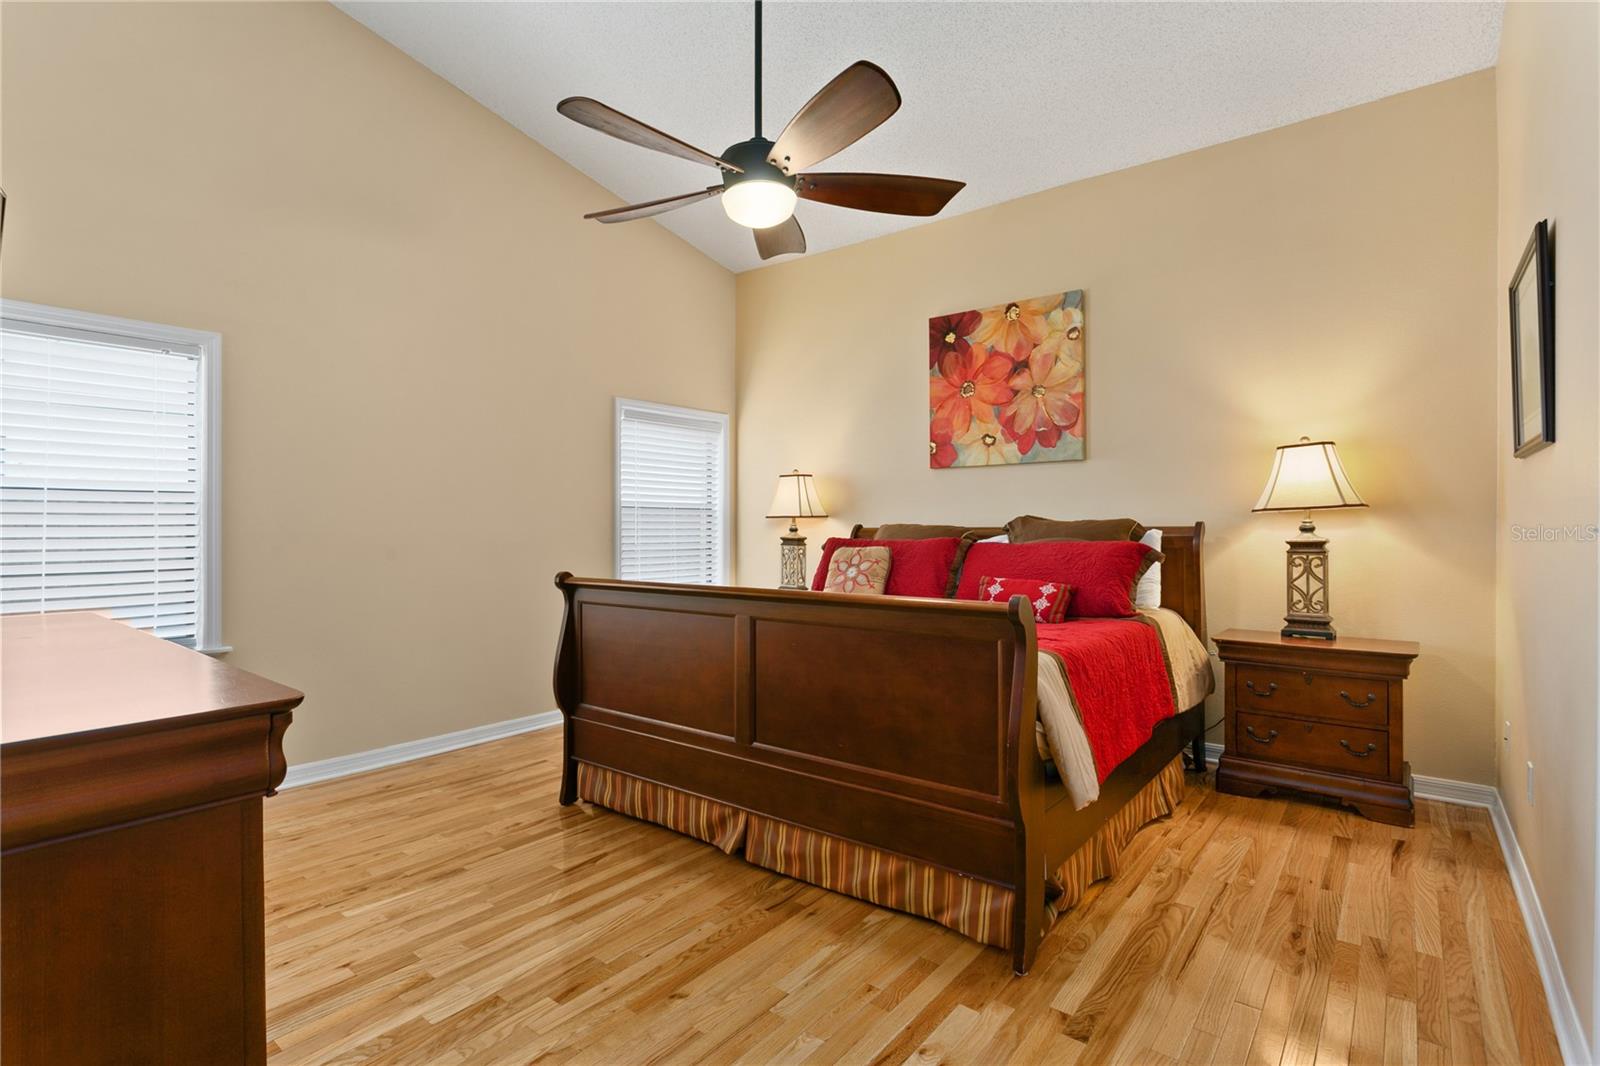 OVERSIZED Master bedroom w/cathedral ceilings and LARGE WALK-IN CLOSET.